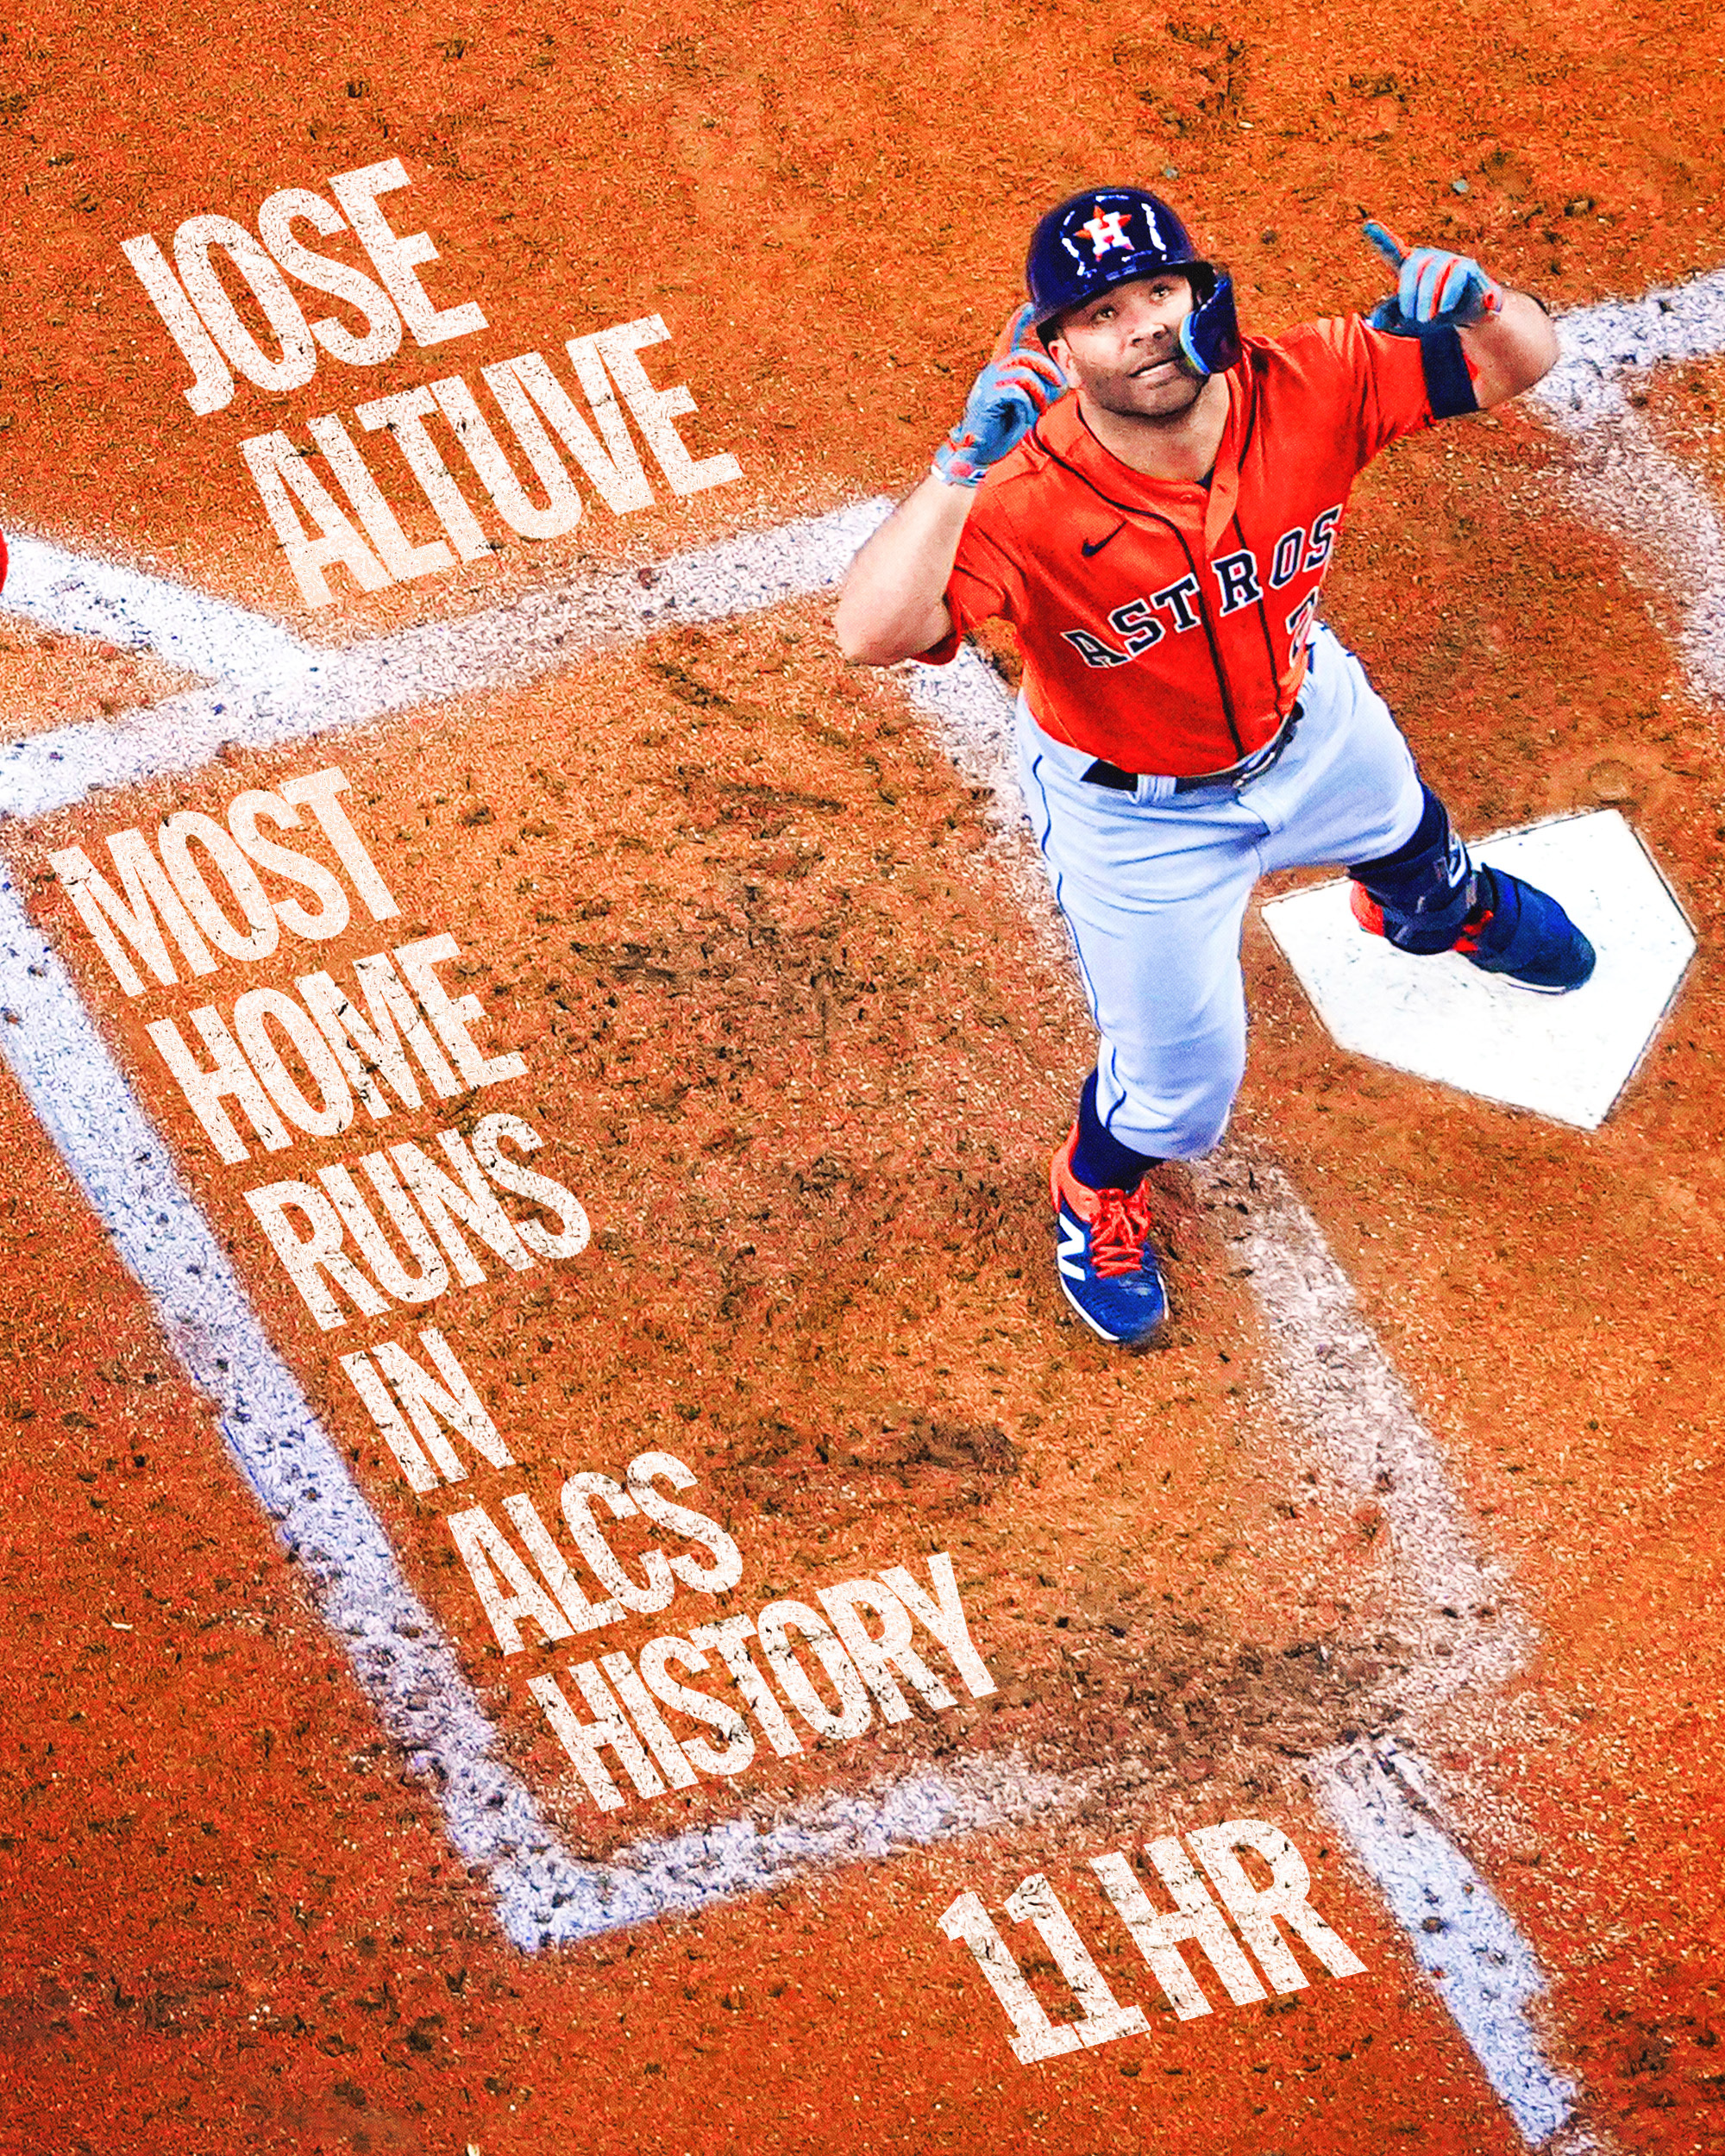 MLB on X: Jose Altuve was made for the #postseason. 😤